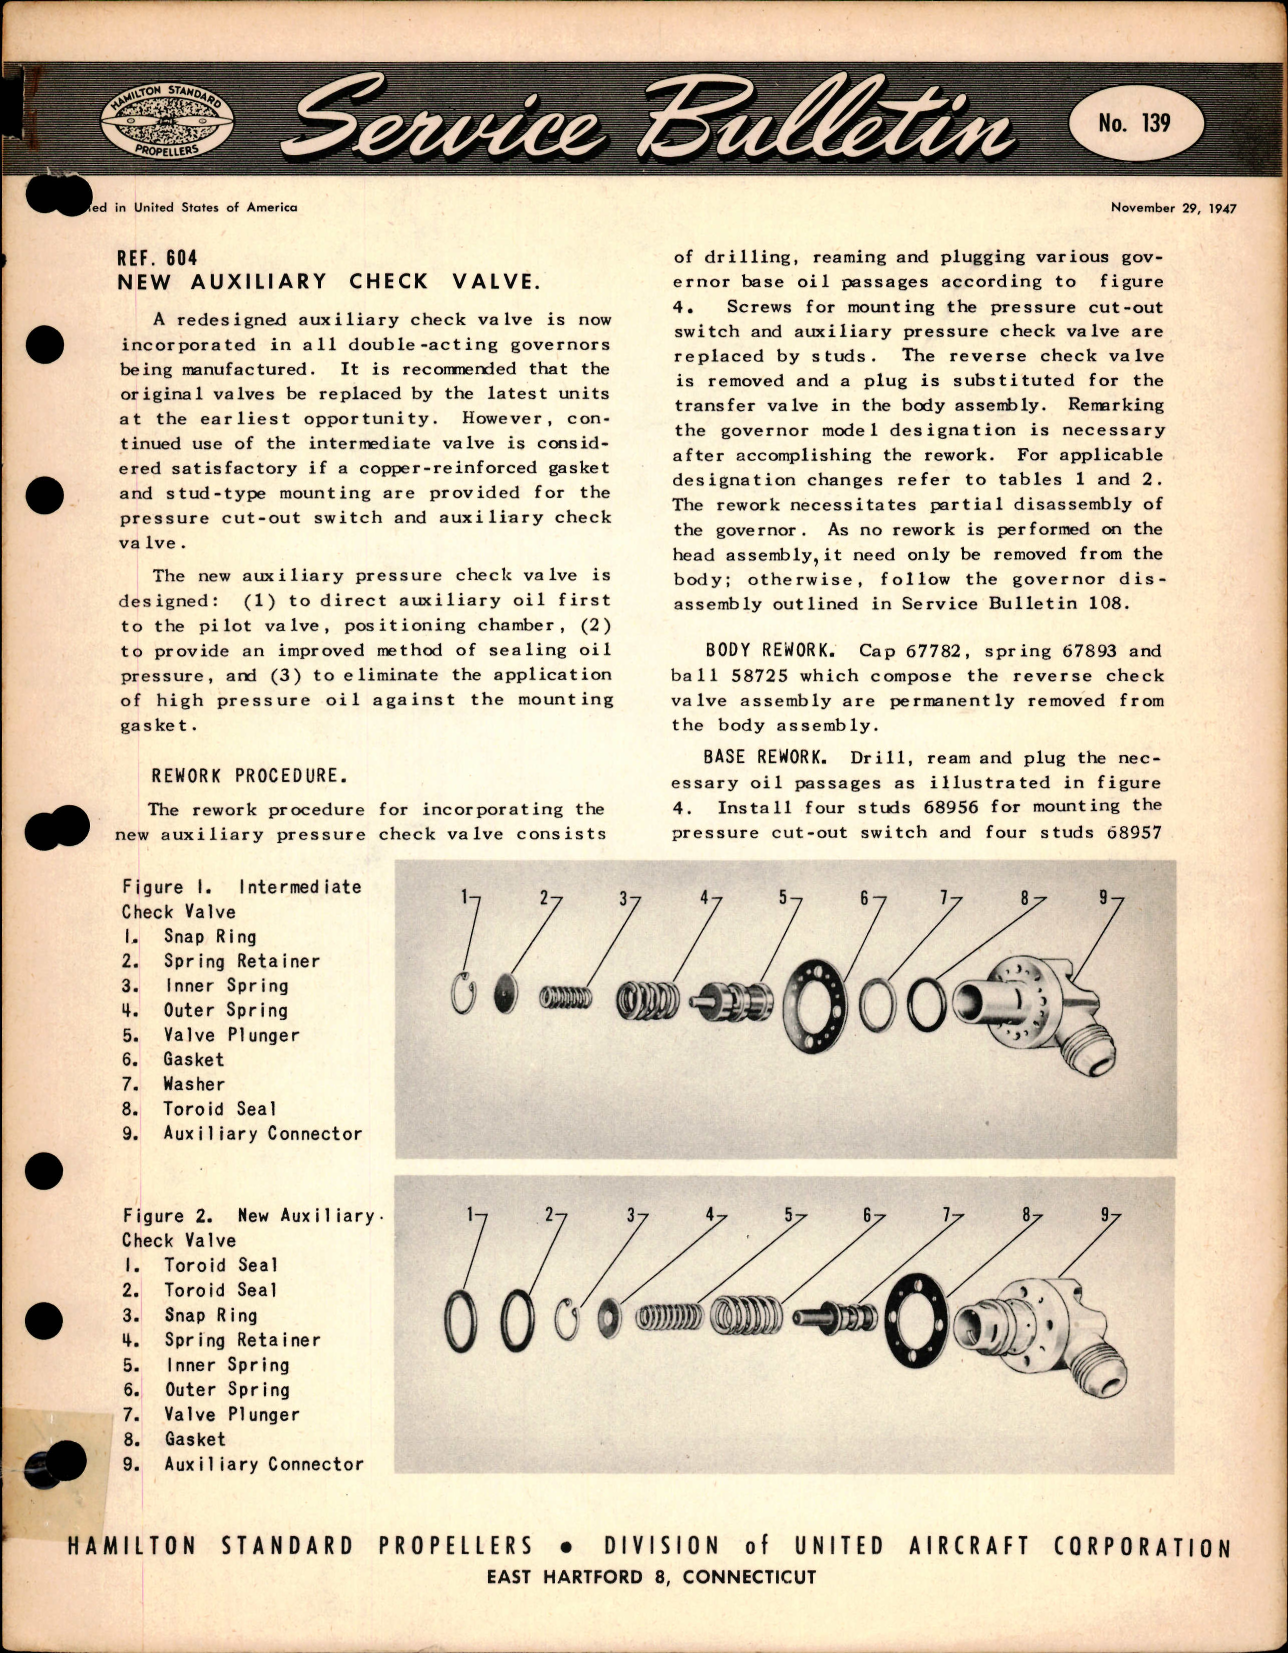 Sample page 1 from AirCorps Library document: New Auxiliary Check Valve, Ref 604